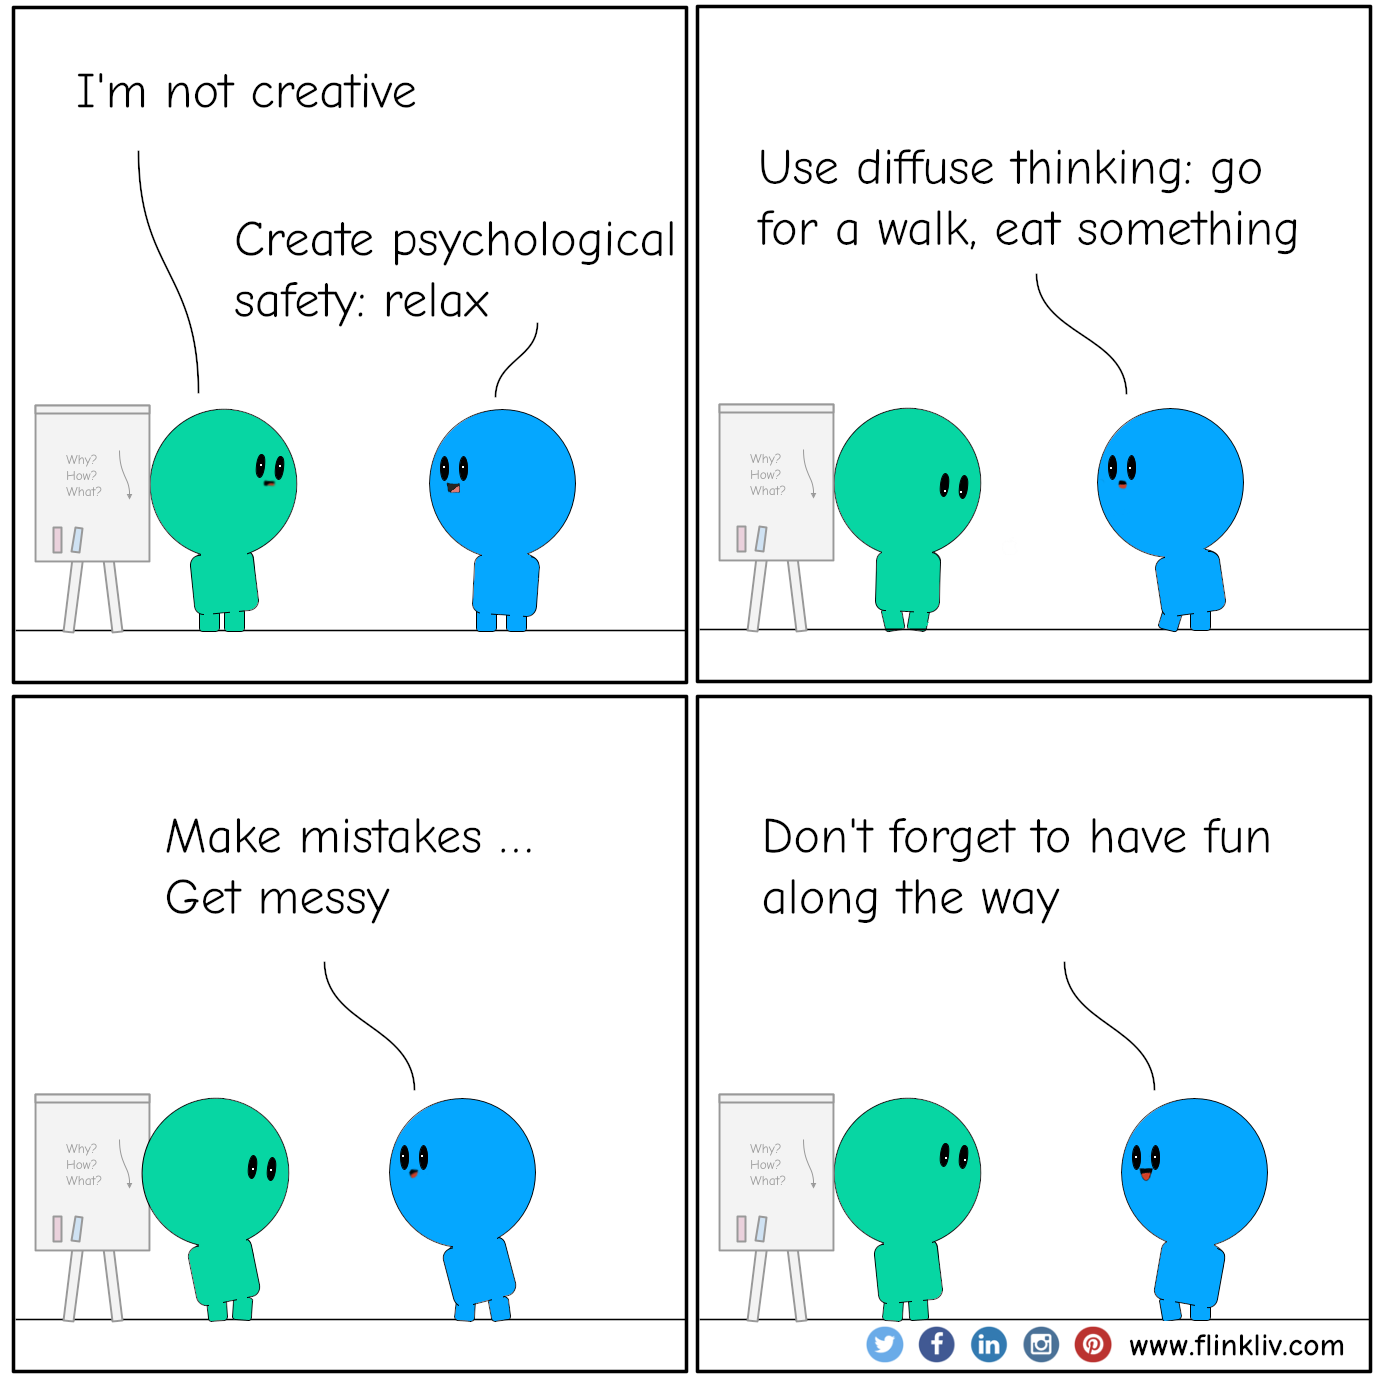 Conversation between A and B about how to stimulate creativity
				A: I'm not creative.
				B: Create psychological safety; relax.
				B: Use diffuse thinking, go for a walk, eat something.
				B: Make mistakes, get messy. 
				B: And don't forget to have a little fun along the way
				